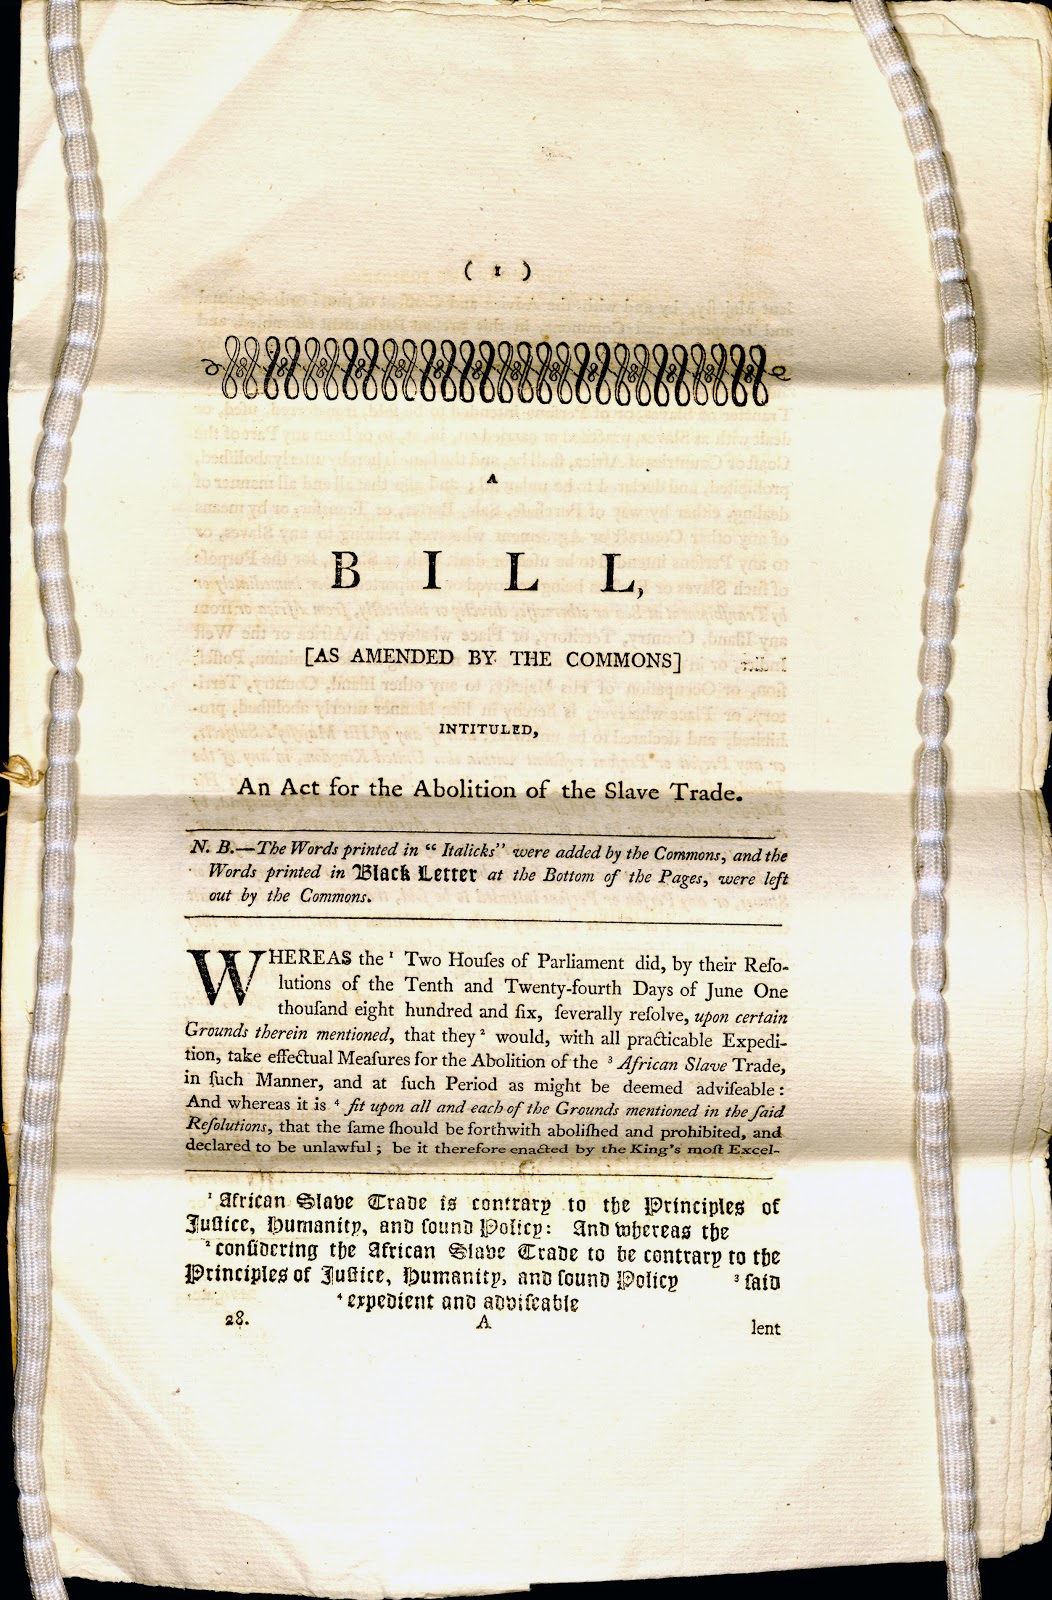 An Act for the Abolition of the Slave Trade